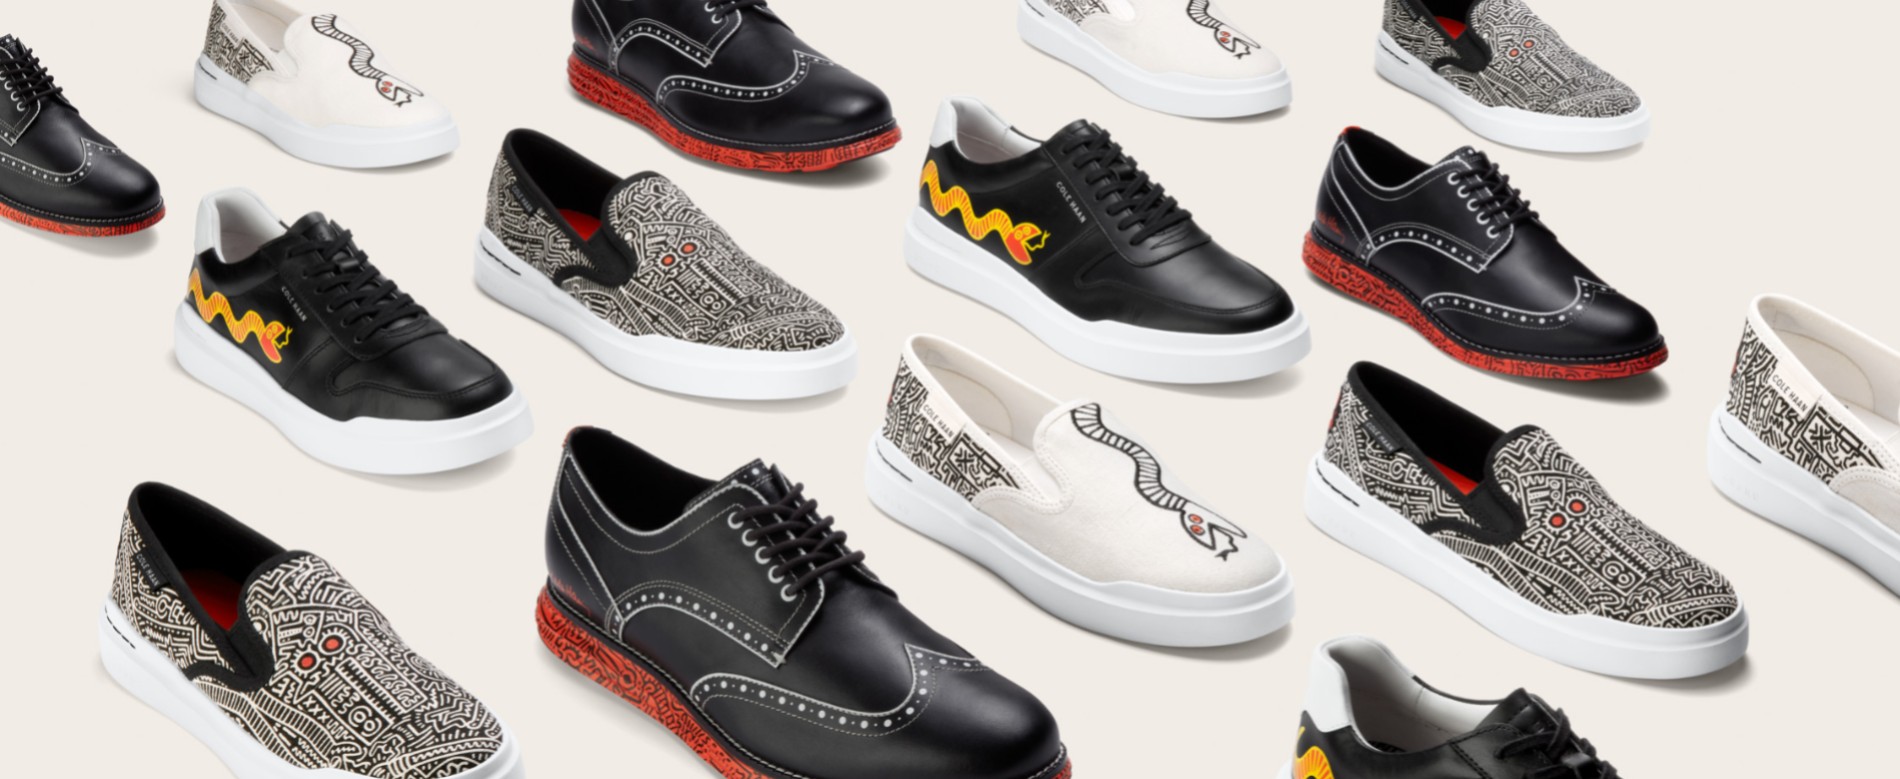 Cole Haan Unveils New Shoe Collaboration Featuring The Art Of Keith Haring